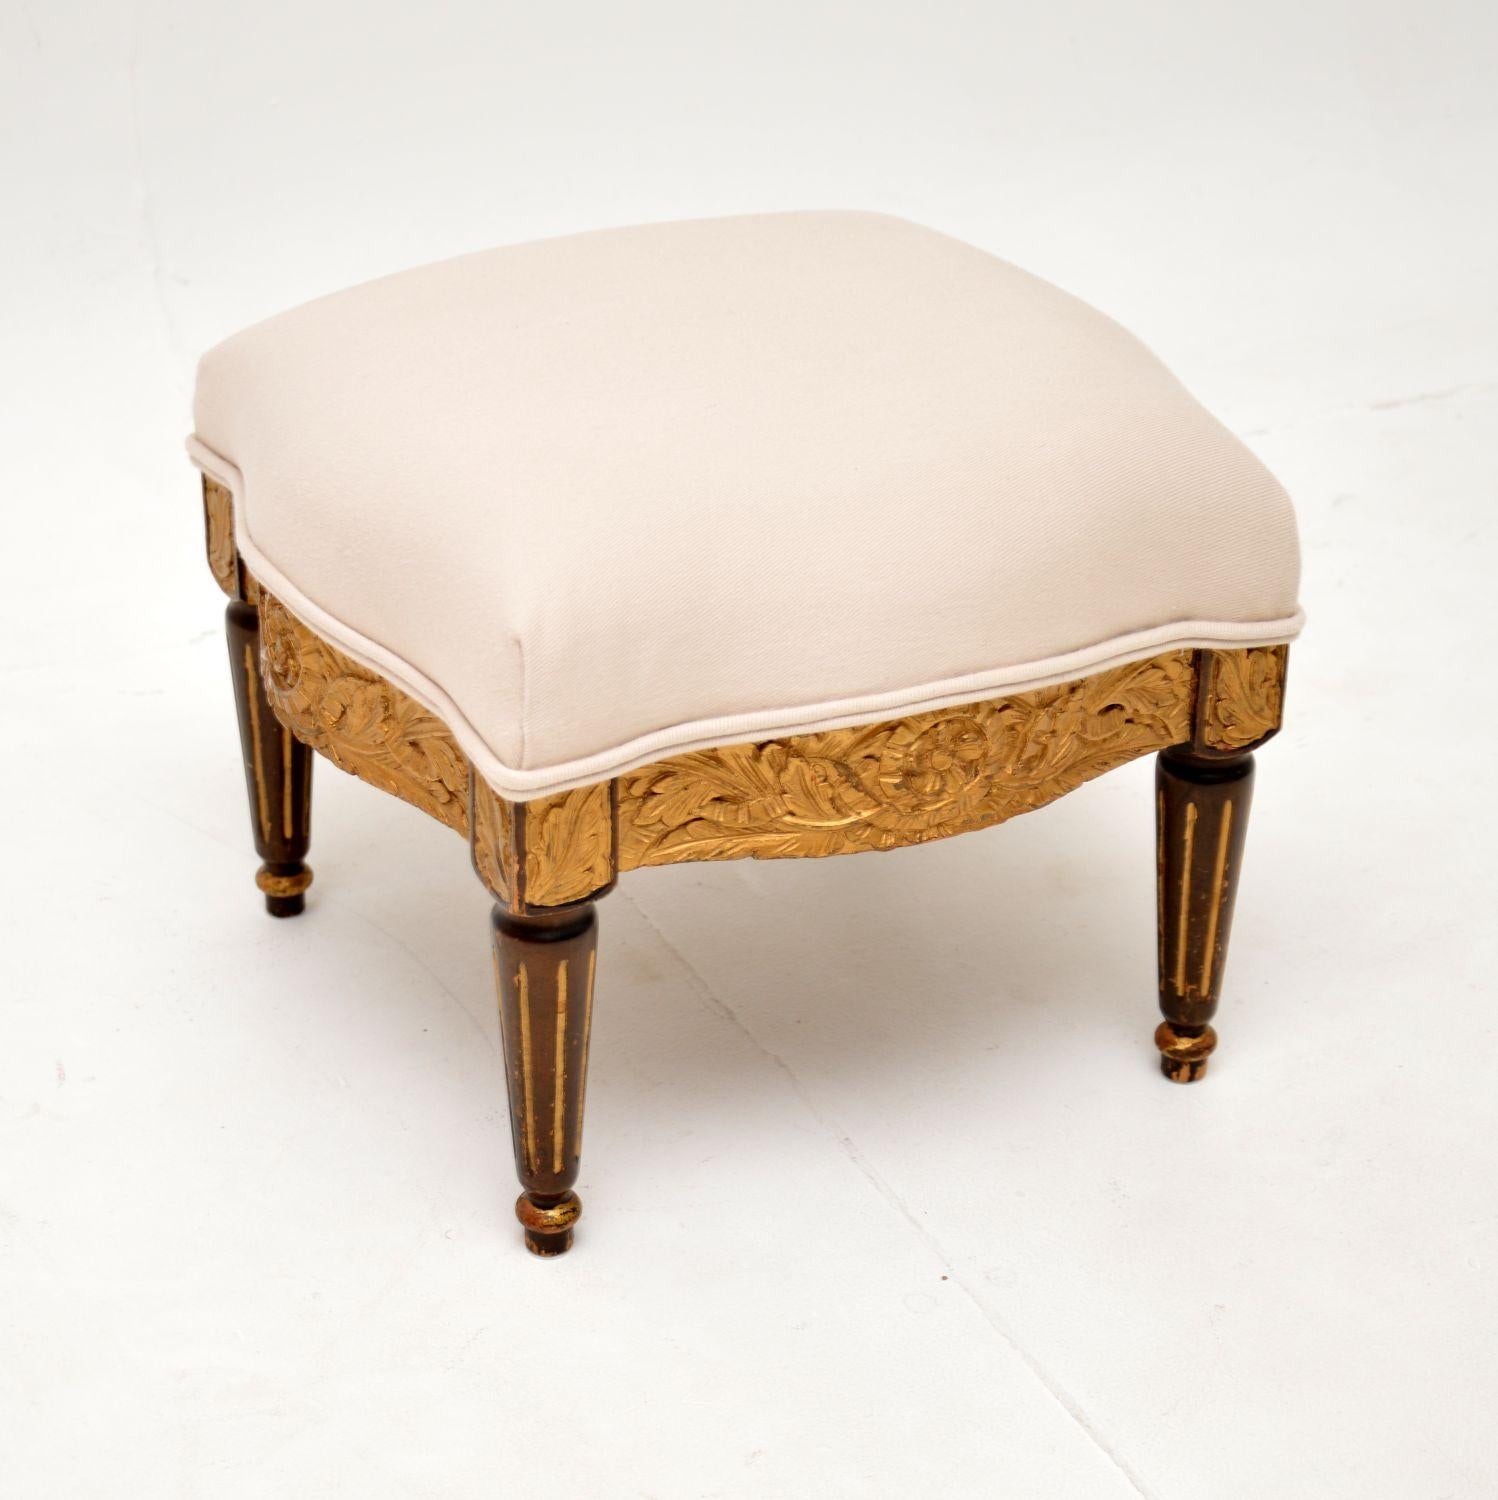 A beautiful little antique French stool in carved gilt wood, dating from around the 1910-20’s.

This is very well made and has a gorgeous design. It is square shaped, with serpentine sides, crisp carving around the edges and turned, fluted